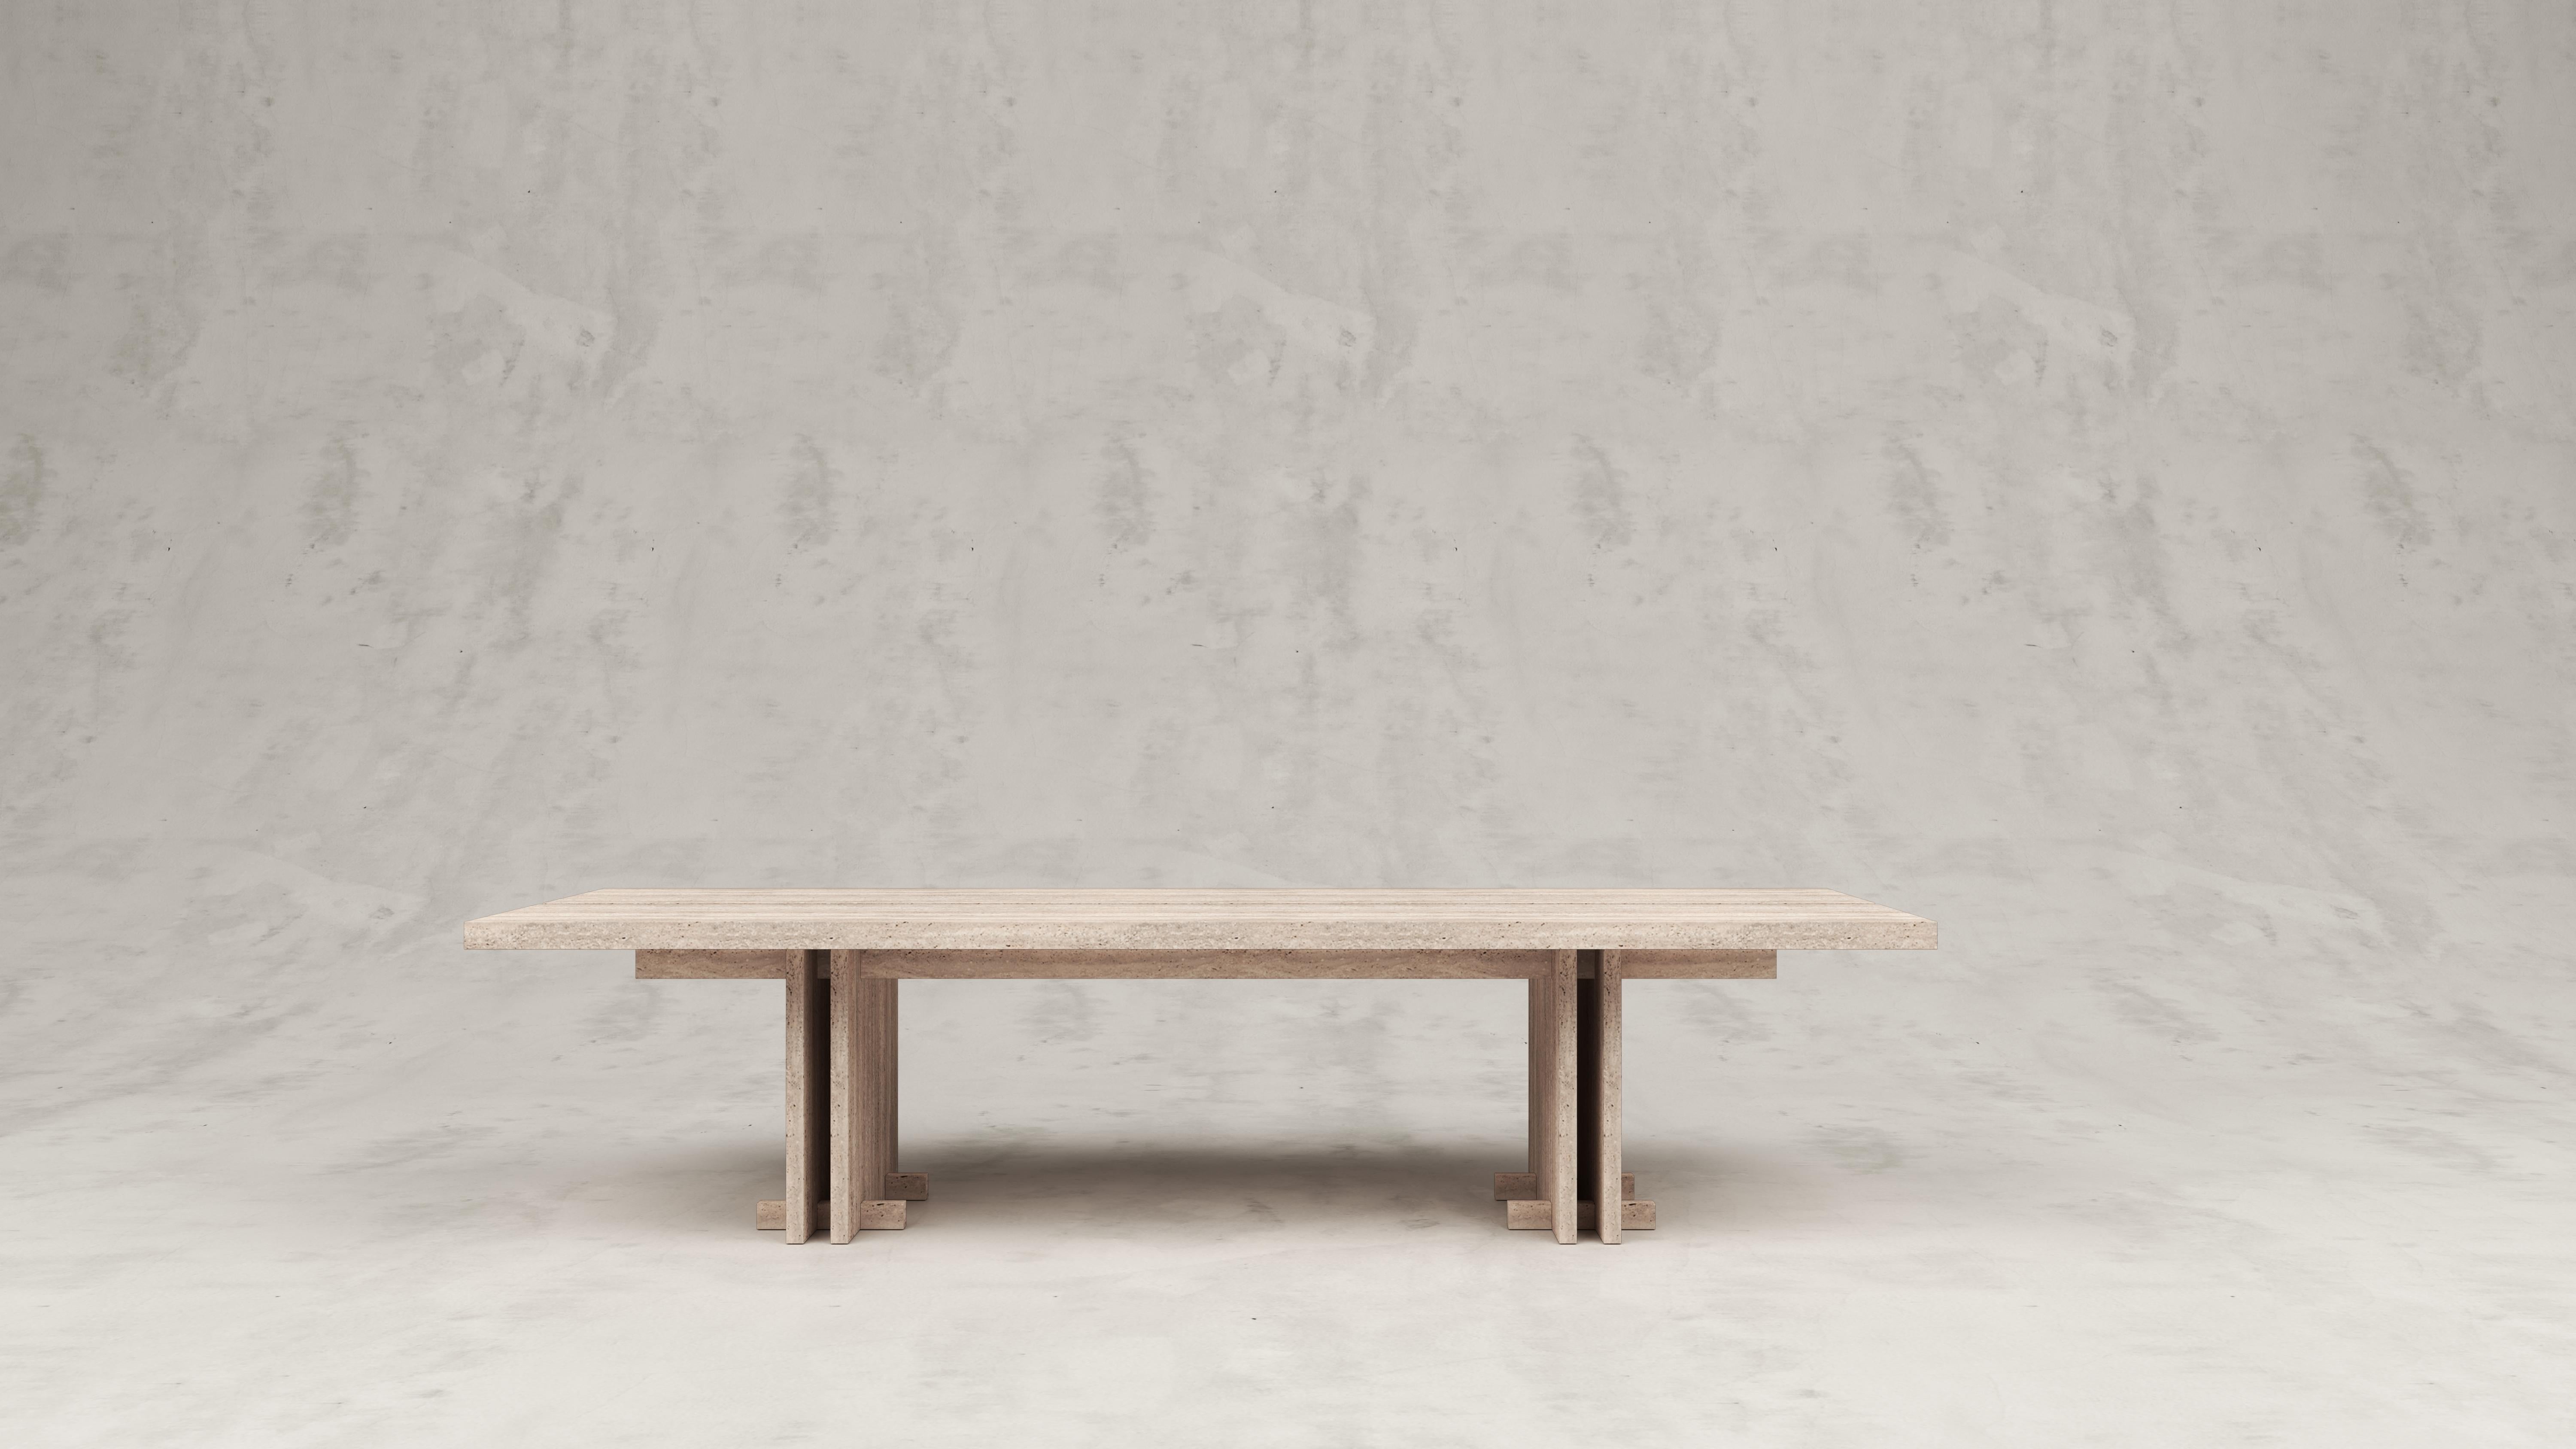 Rift travertino Gririo dining table by Andy Kerstens
Dimensions: W 240 x D 98 x H 74 cm
Materials: All stone travertino gririo
Optional little feet at table legs
Handmade in Belgium.

Available in Solid Larch, Oak and Walnut and in 320 x 102 x